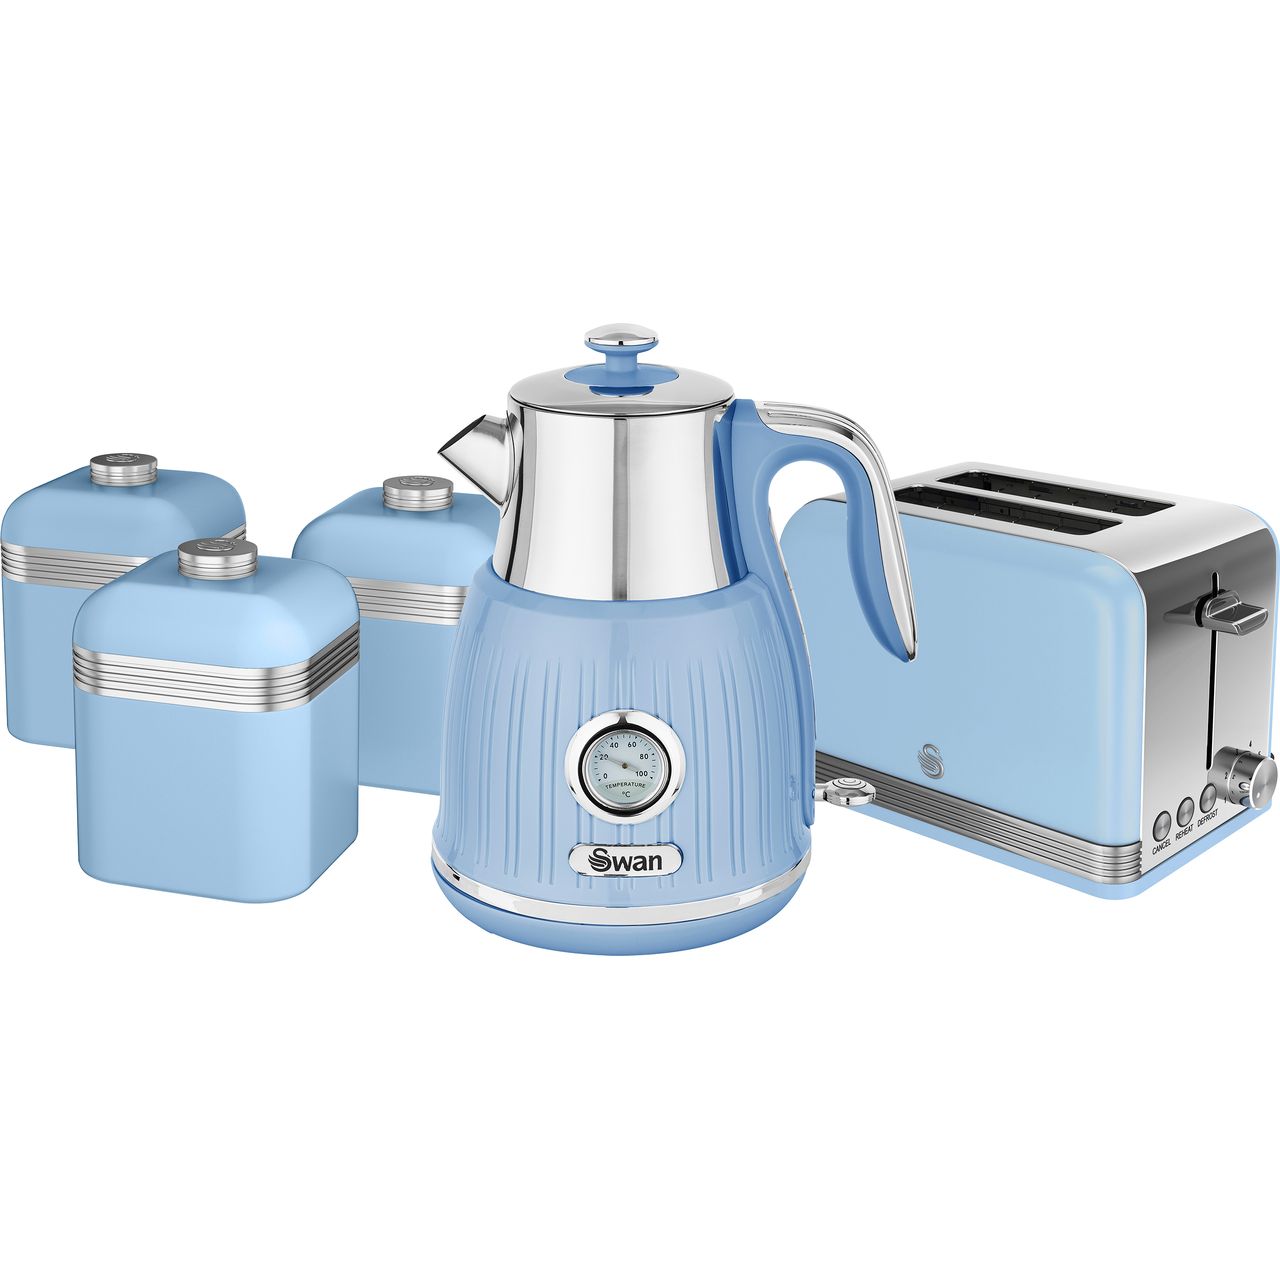 Swan Retro STRP3021BLN Kettle And Toaster Sets Review